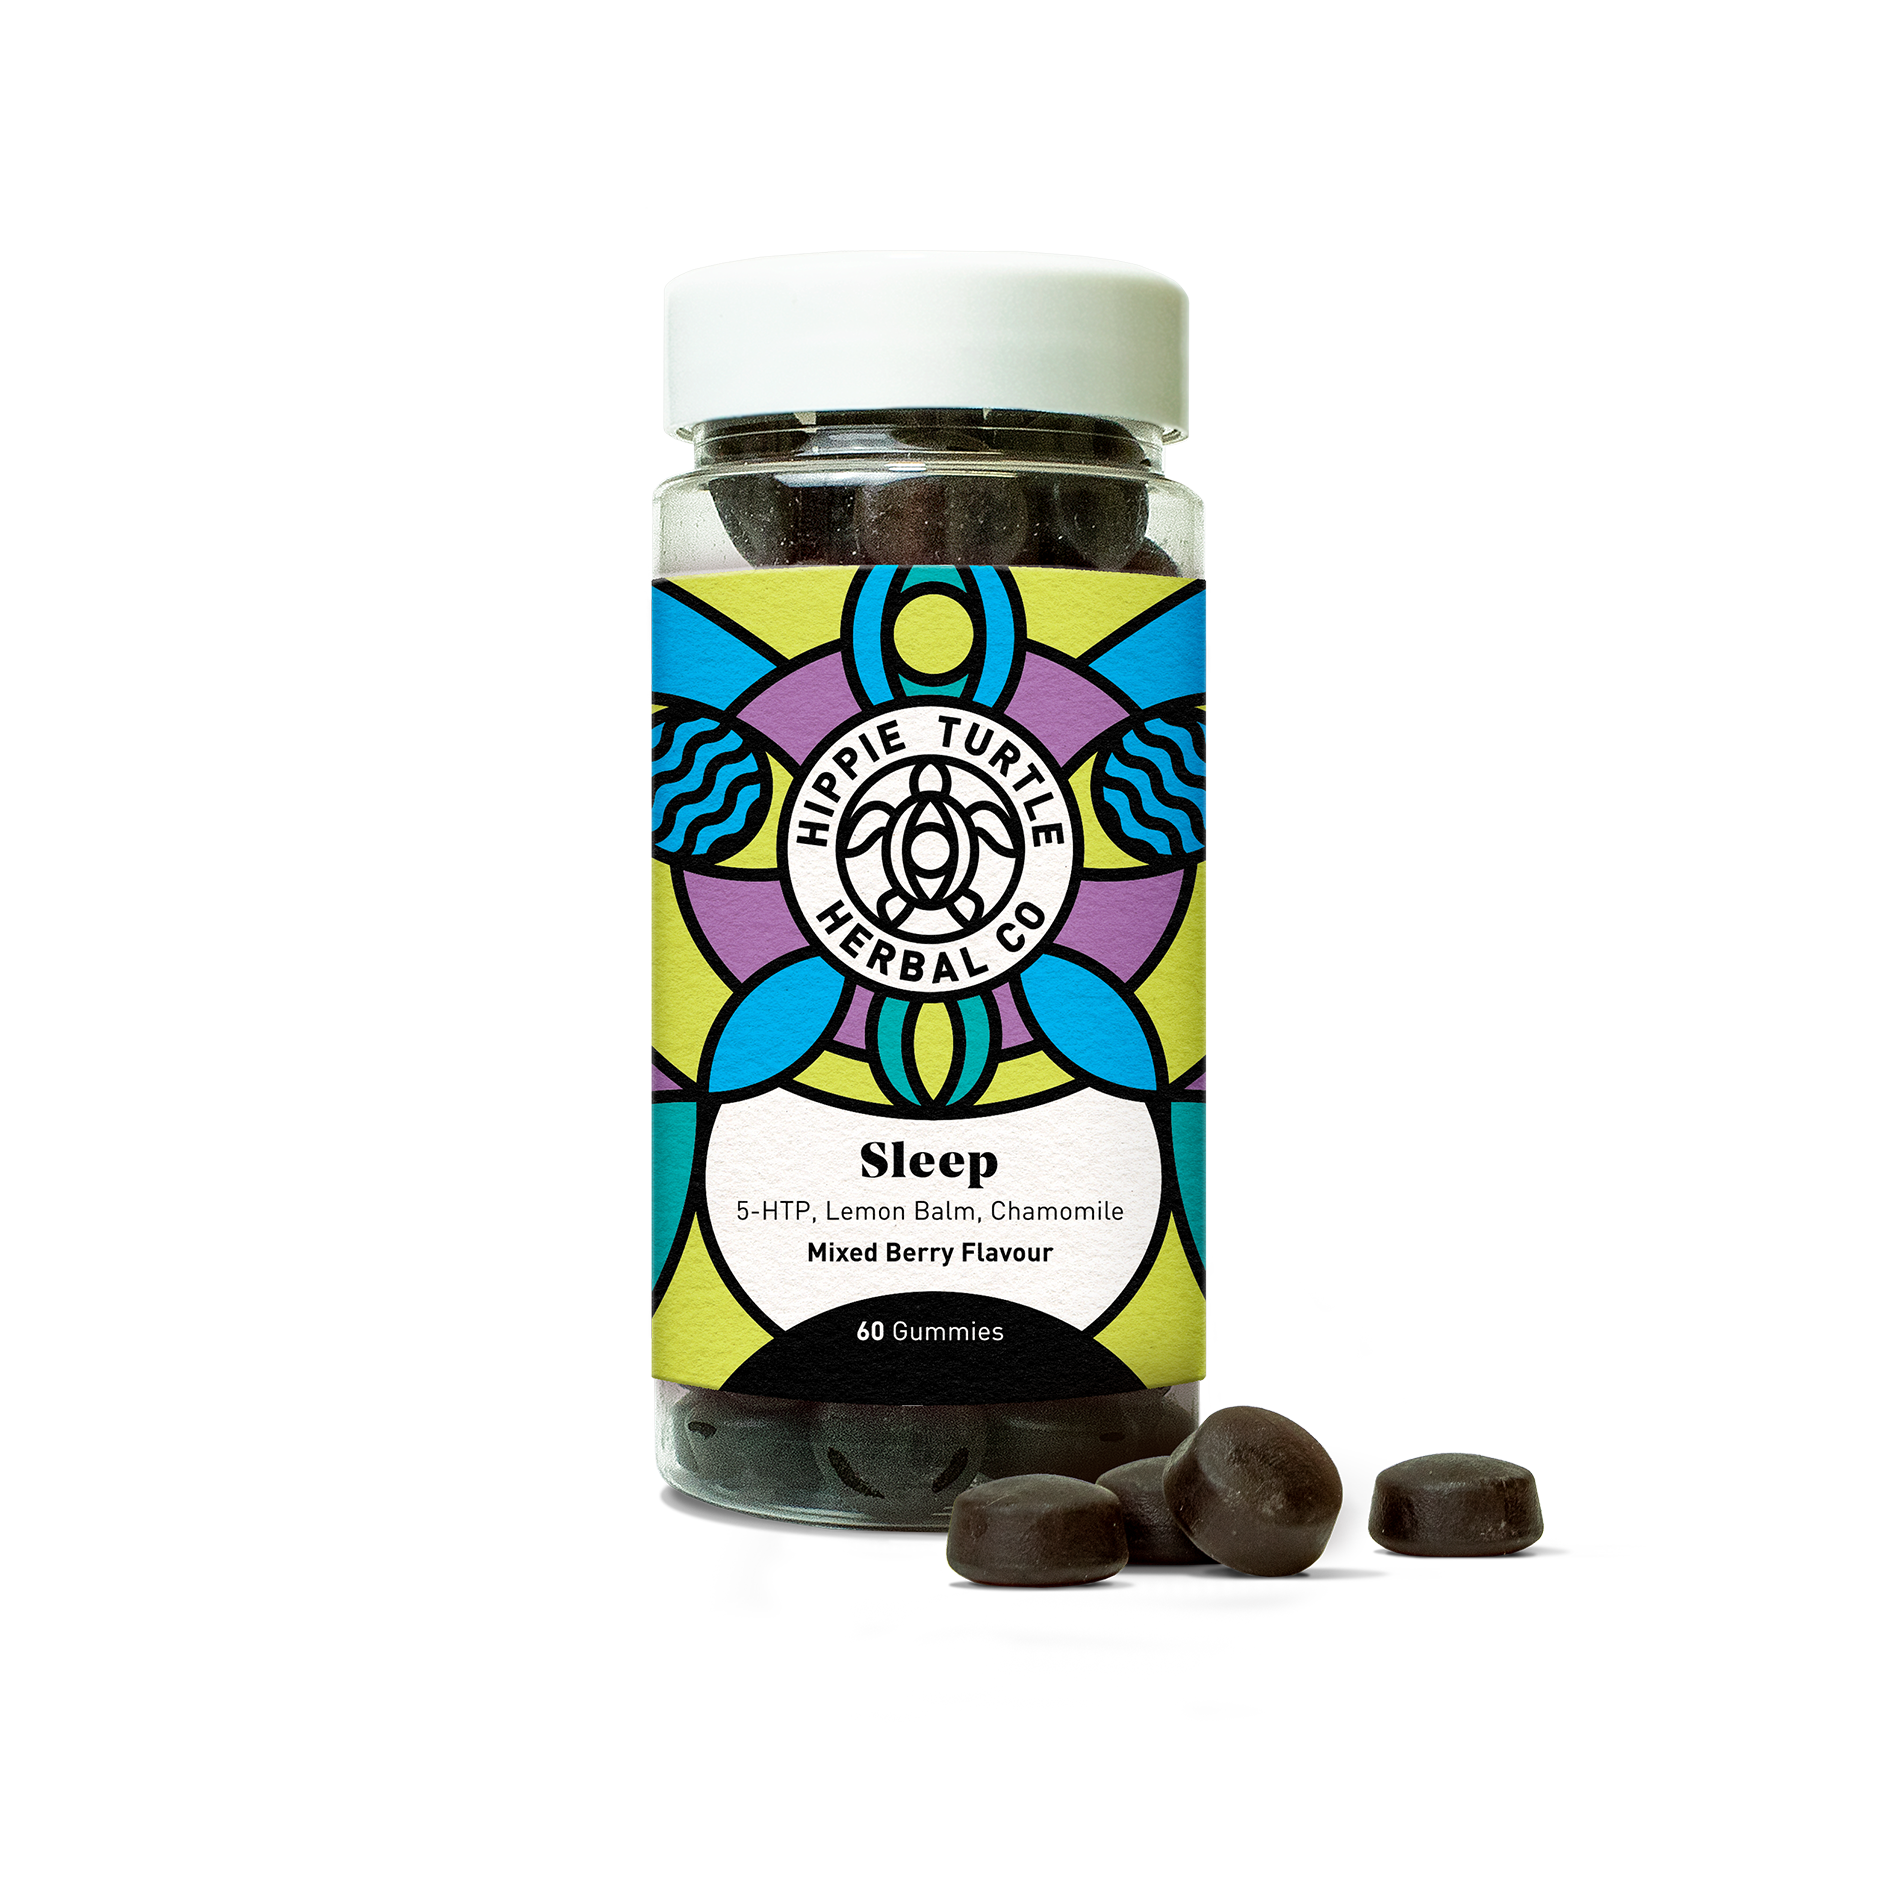 Sleep support supplement in the form of nootropic gummies. Contains sleep promoting ingredients such as 5-HTP, zinc, chamomile and lemon balm.